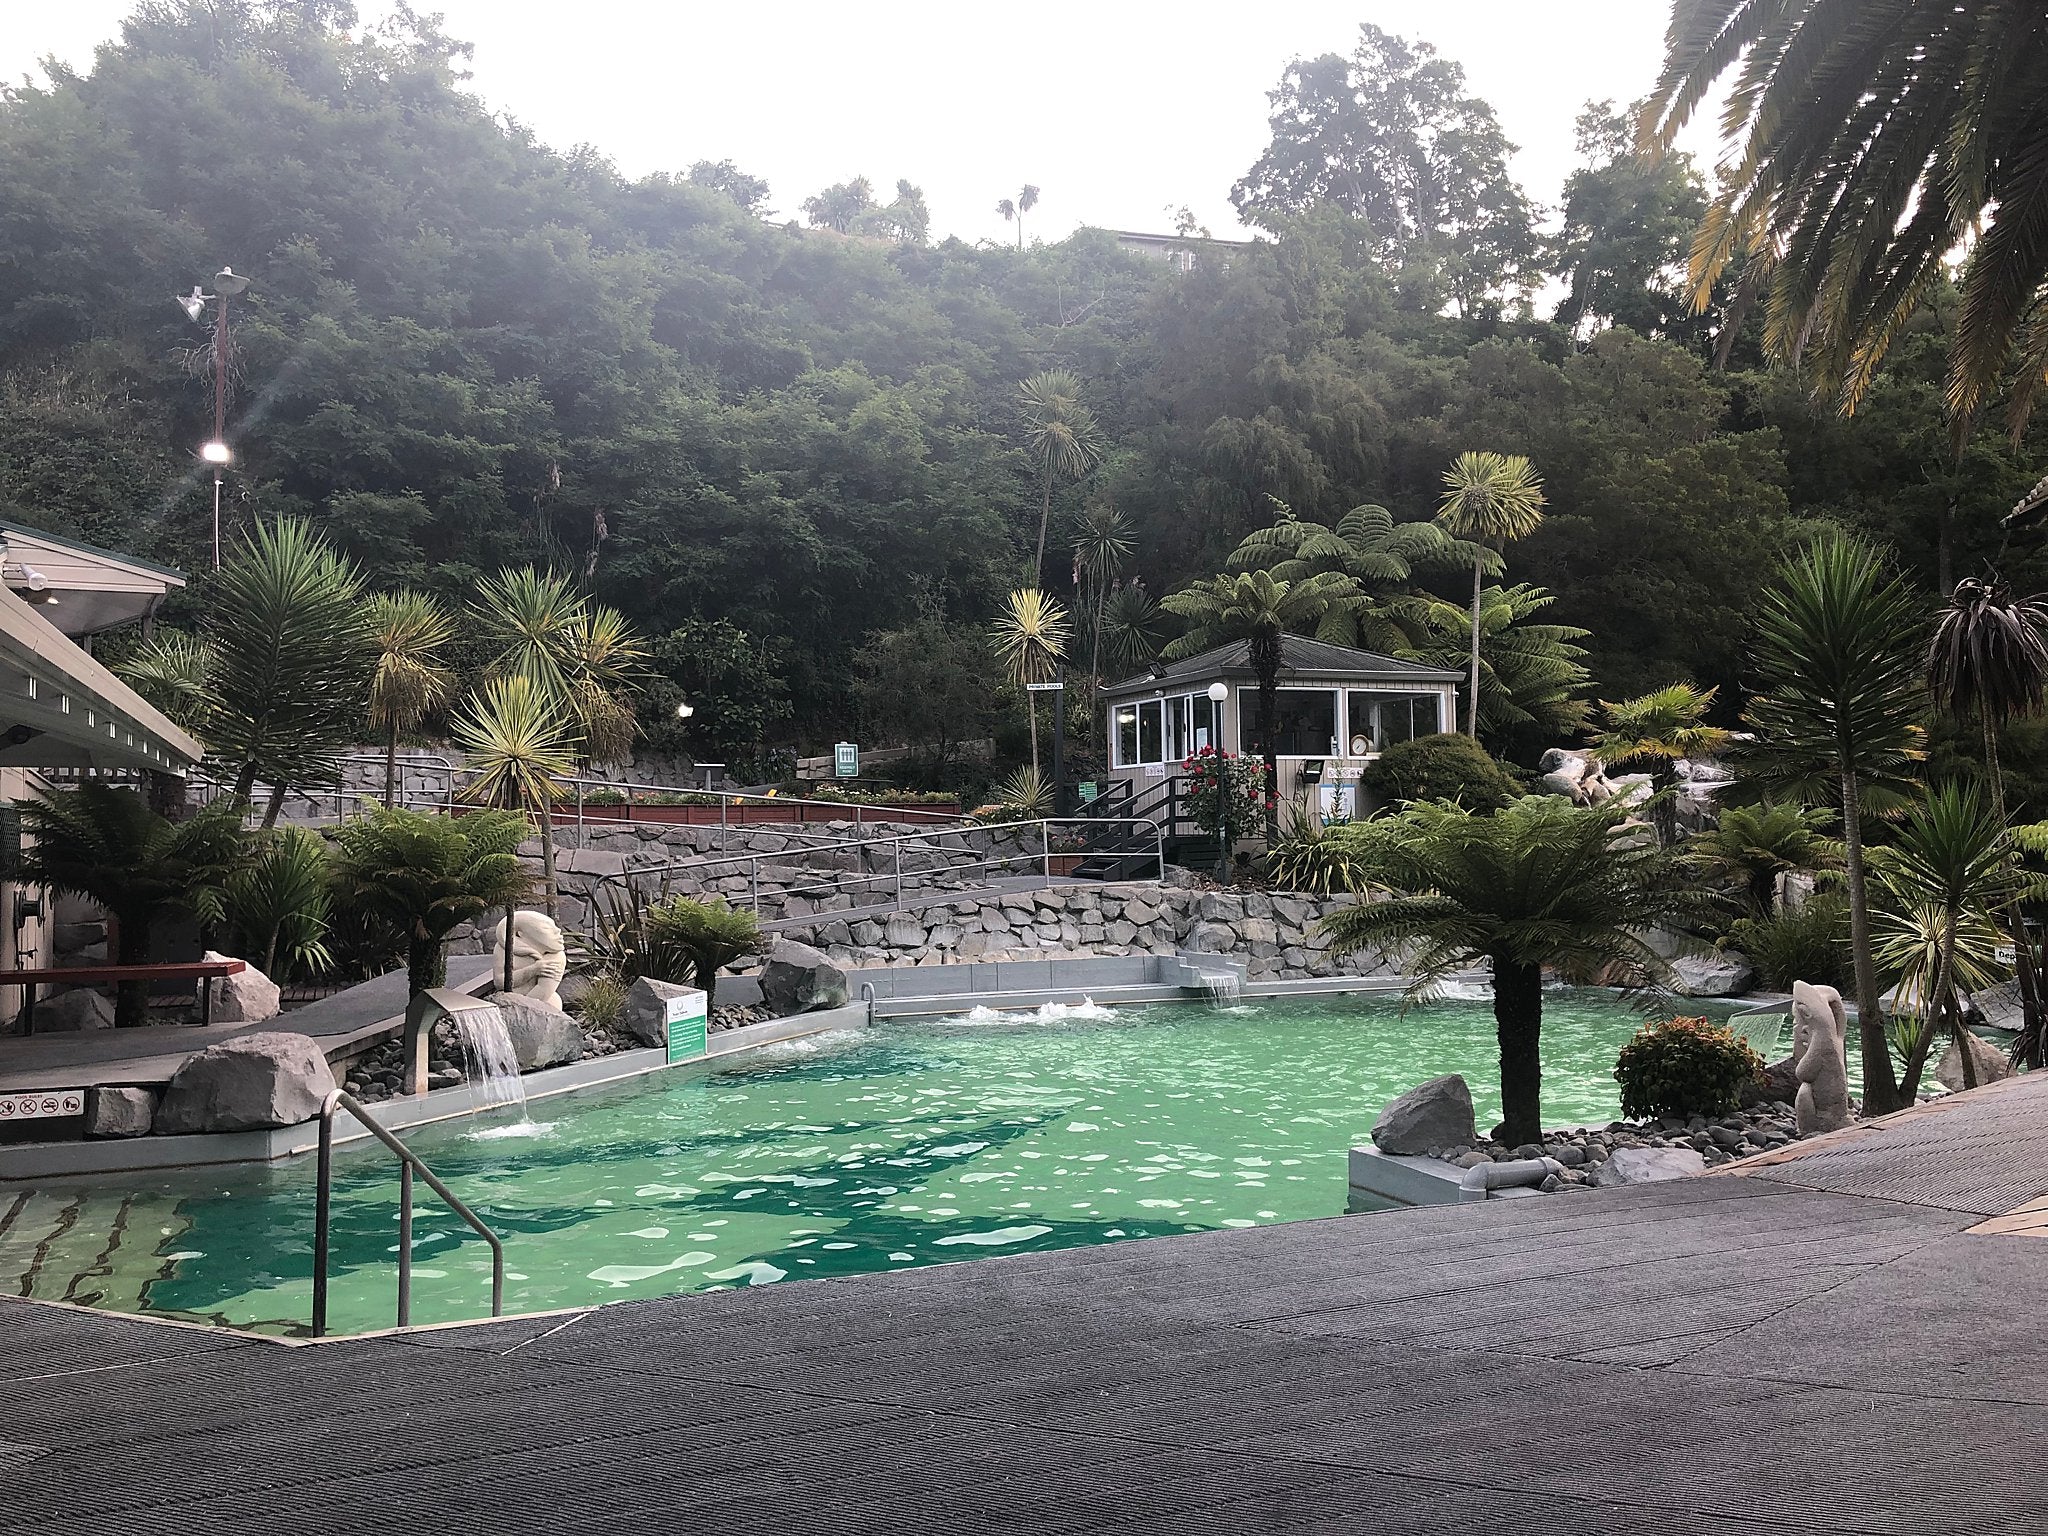 Why we went to DeBrett thermal pools in the middle of a heat wave